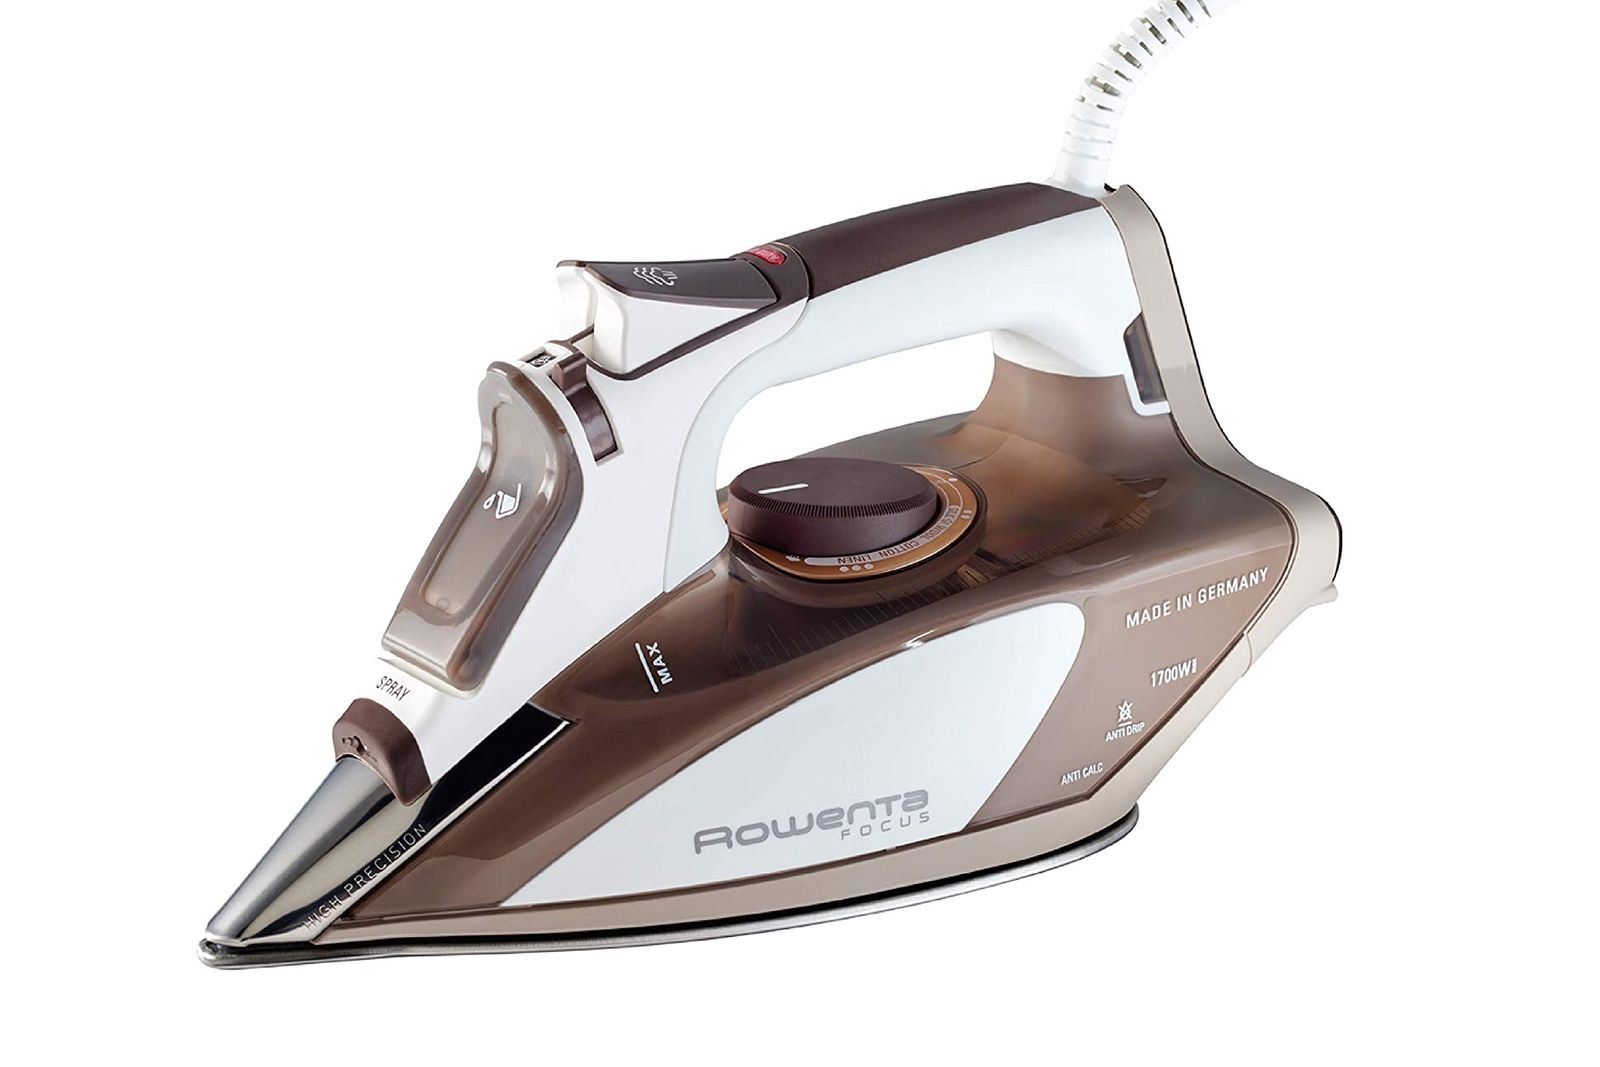 Best steam irons 2024 Smooth things out with these steamy picks